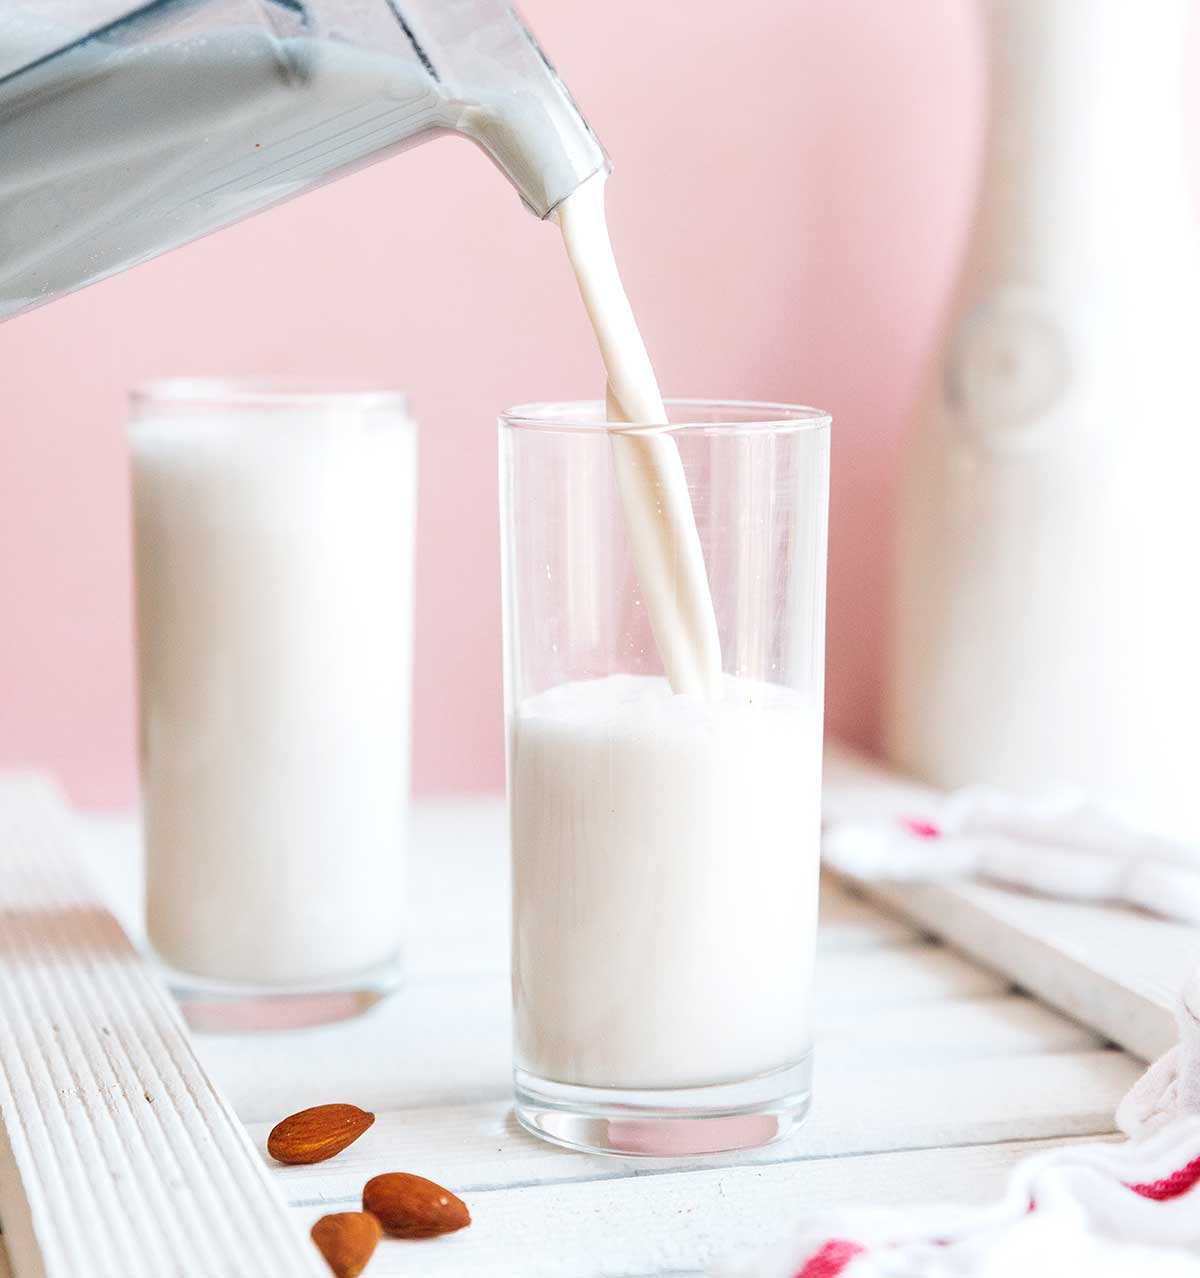 Almond milk being poured into glasses.